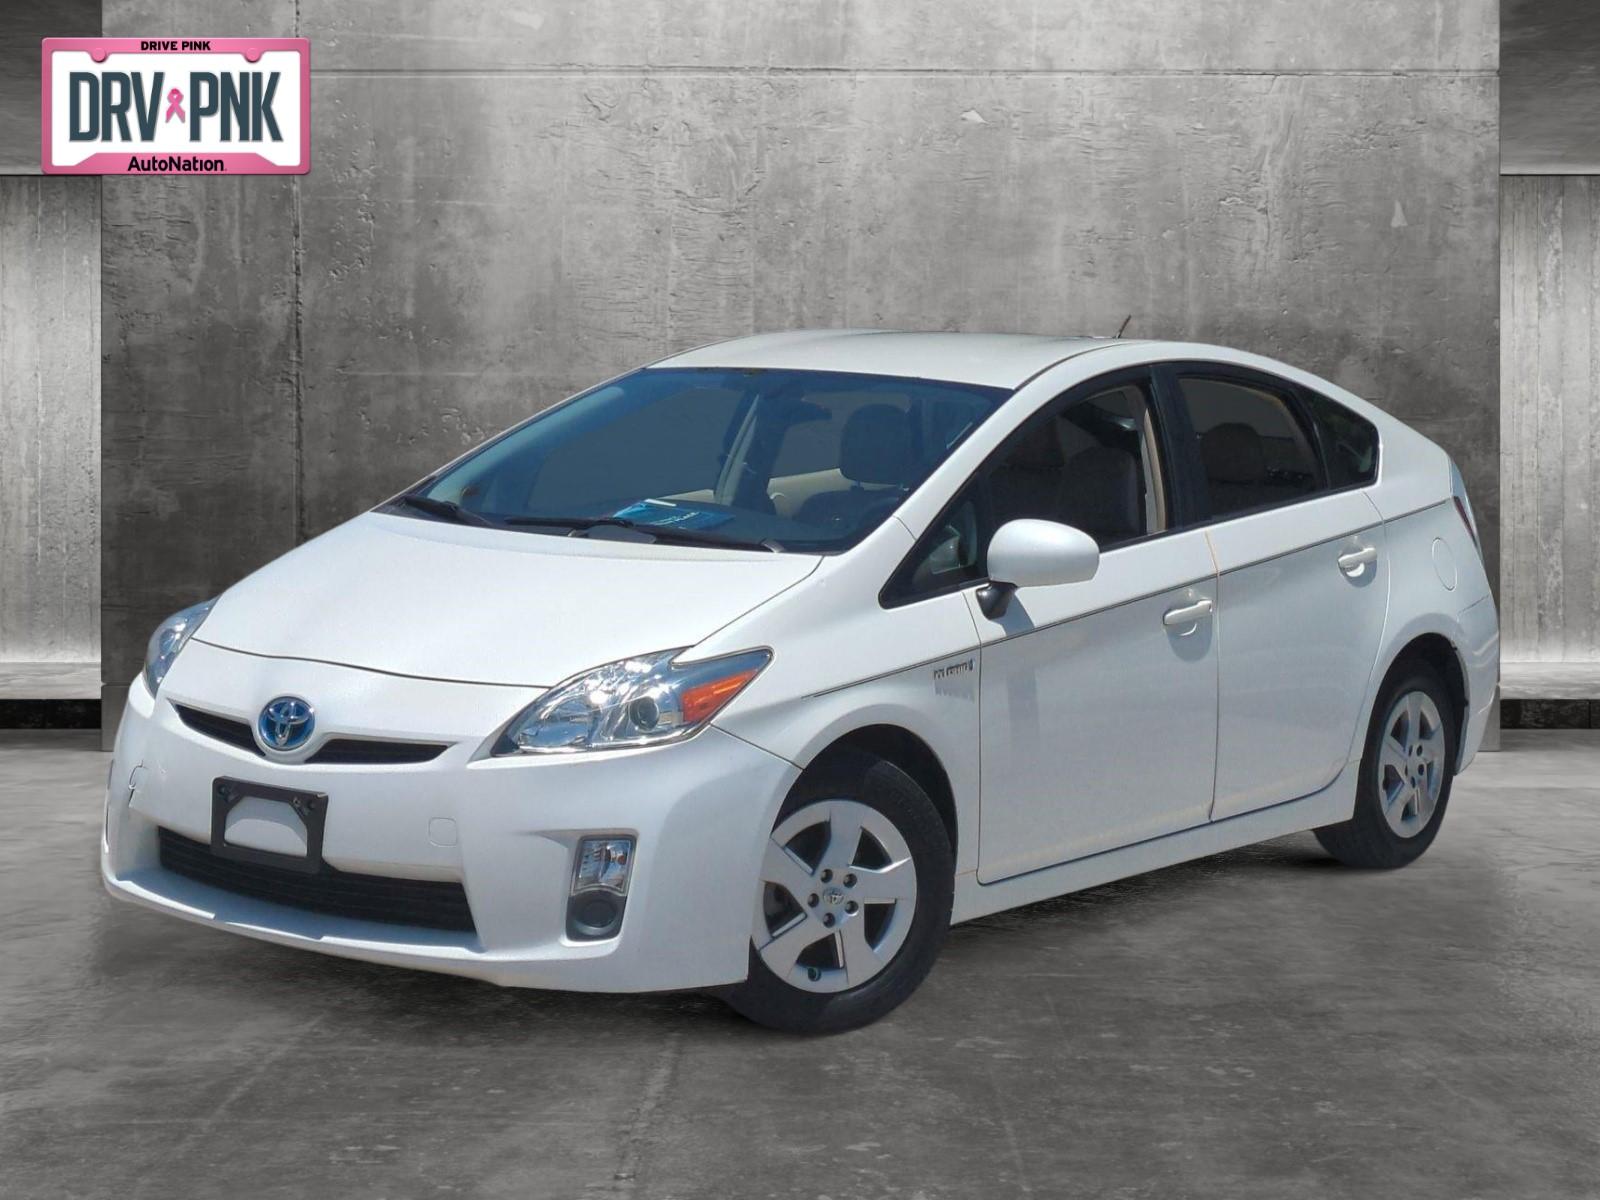 2010 Toyota Prius Vehicle Photo in Ft. Myers, FL 33907